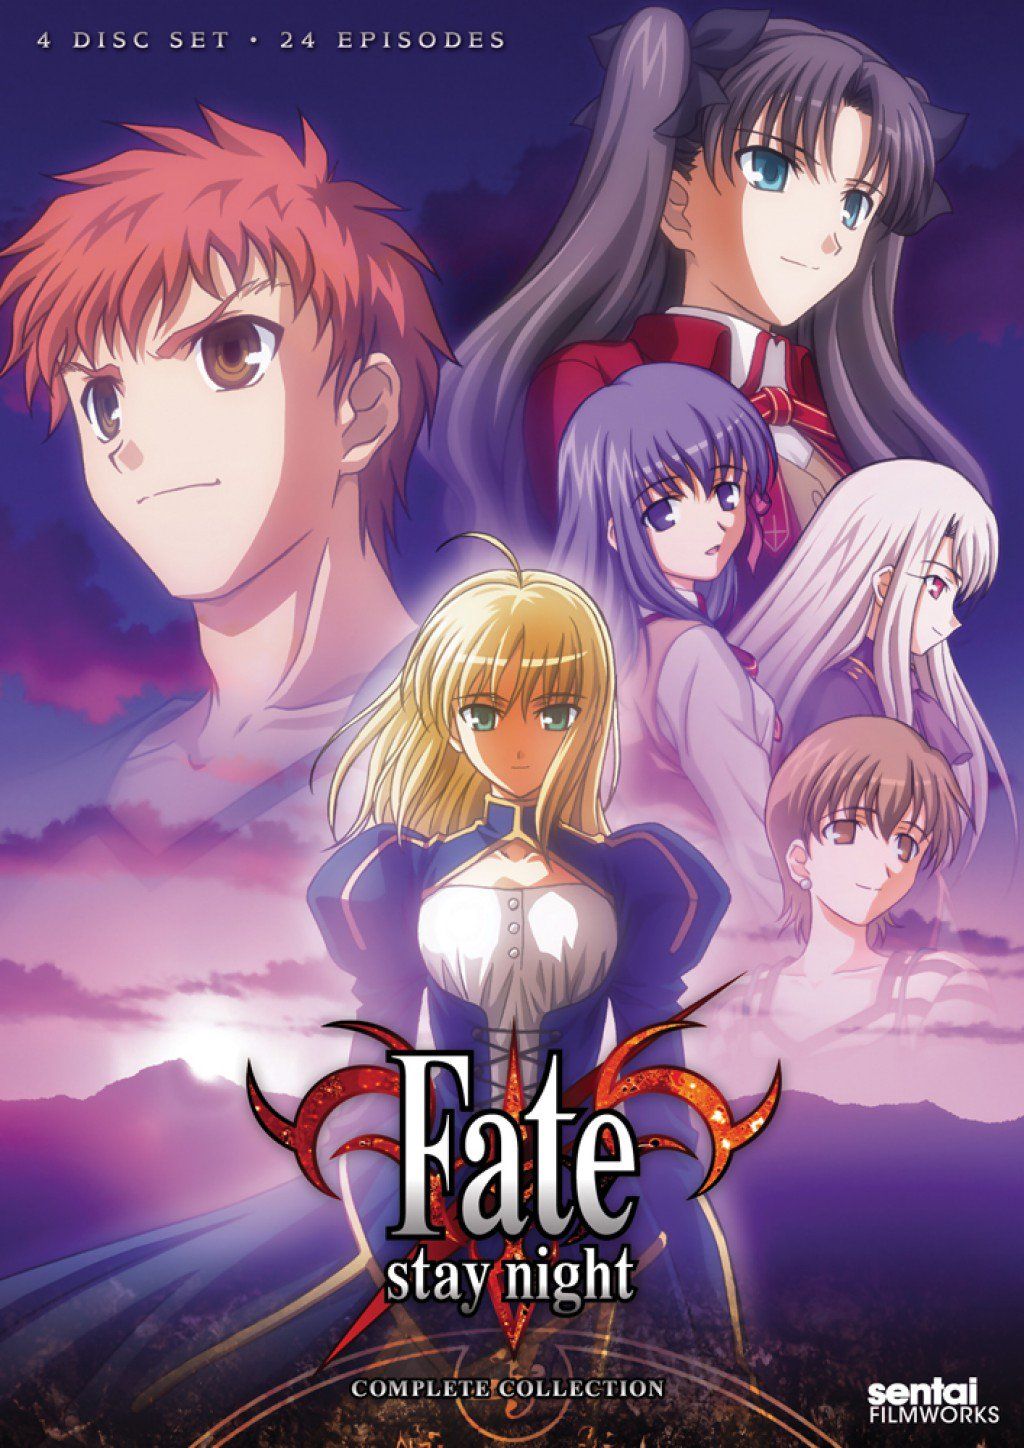 Brave Shine Fate Stay Night Unlimited Blade Works Op Silver S Lyrics